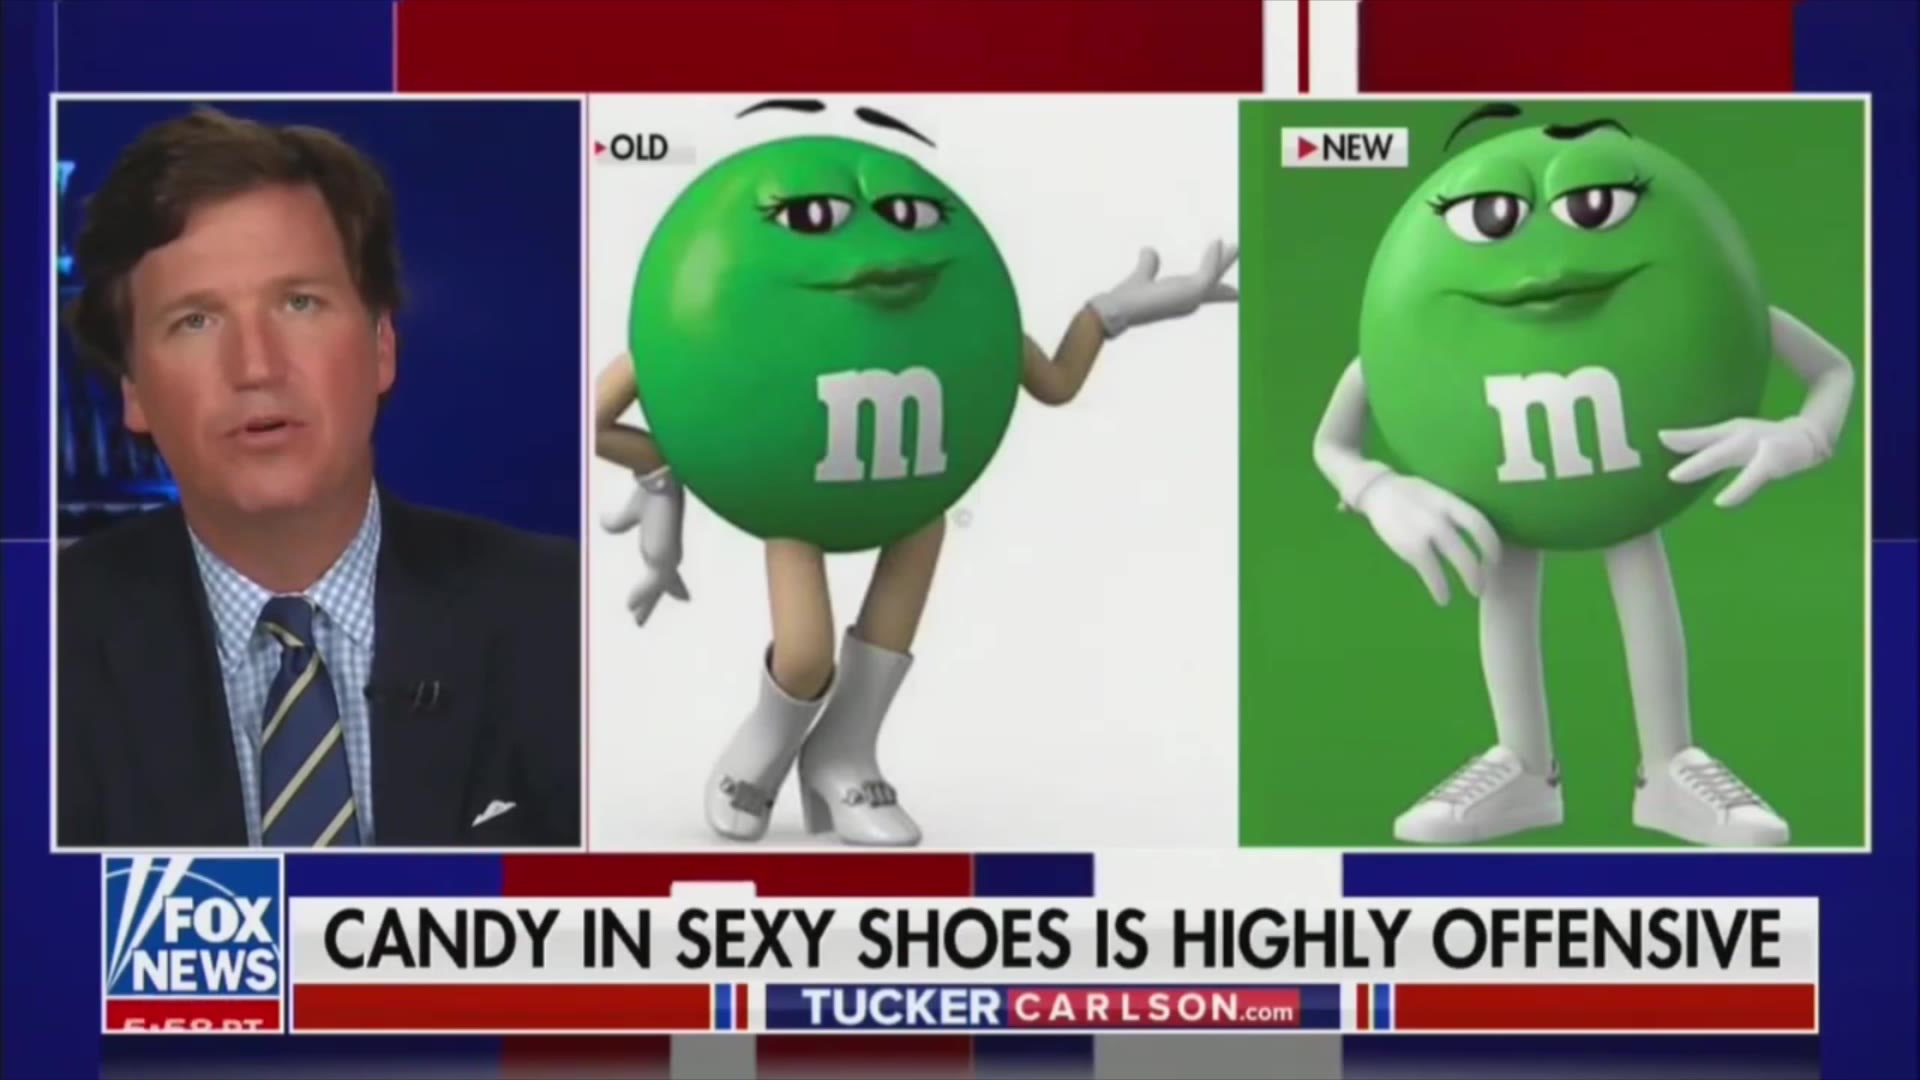 Voice of Green M&M Applauds Candy's Identity Change